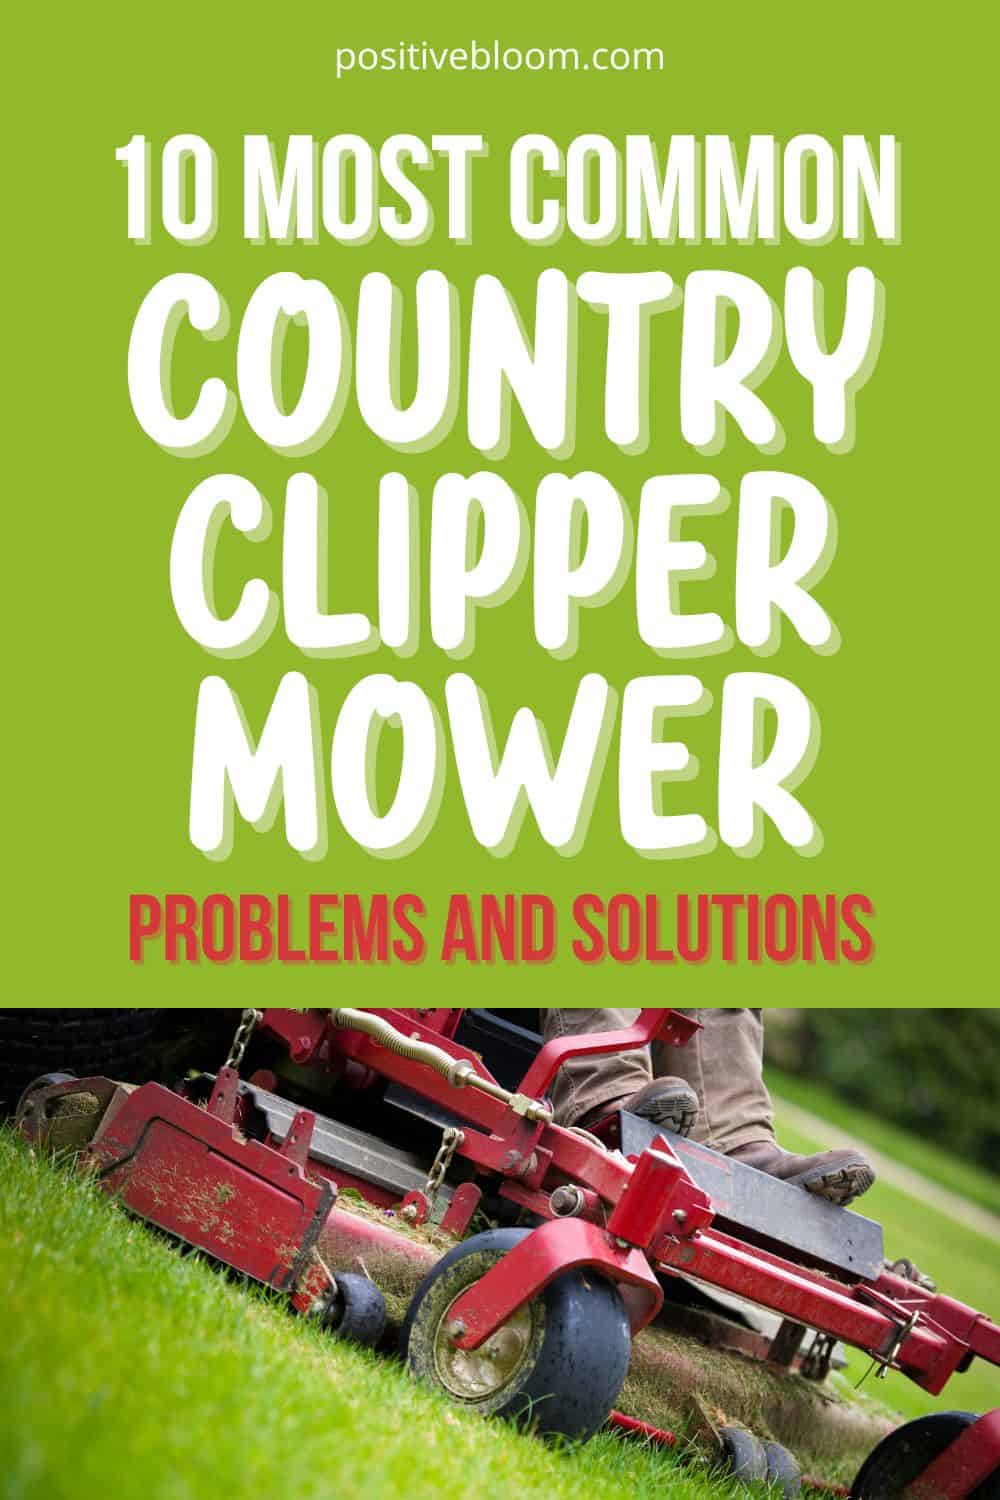 10 Most Common Country Clipper Mower Problems And Solutions Pinterest